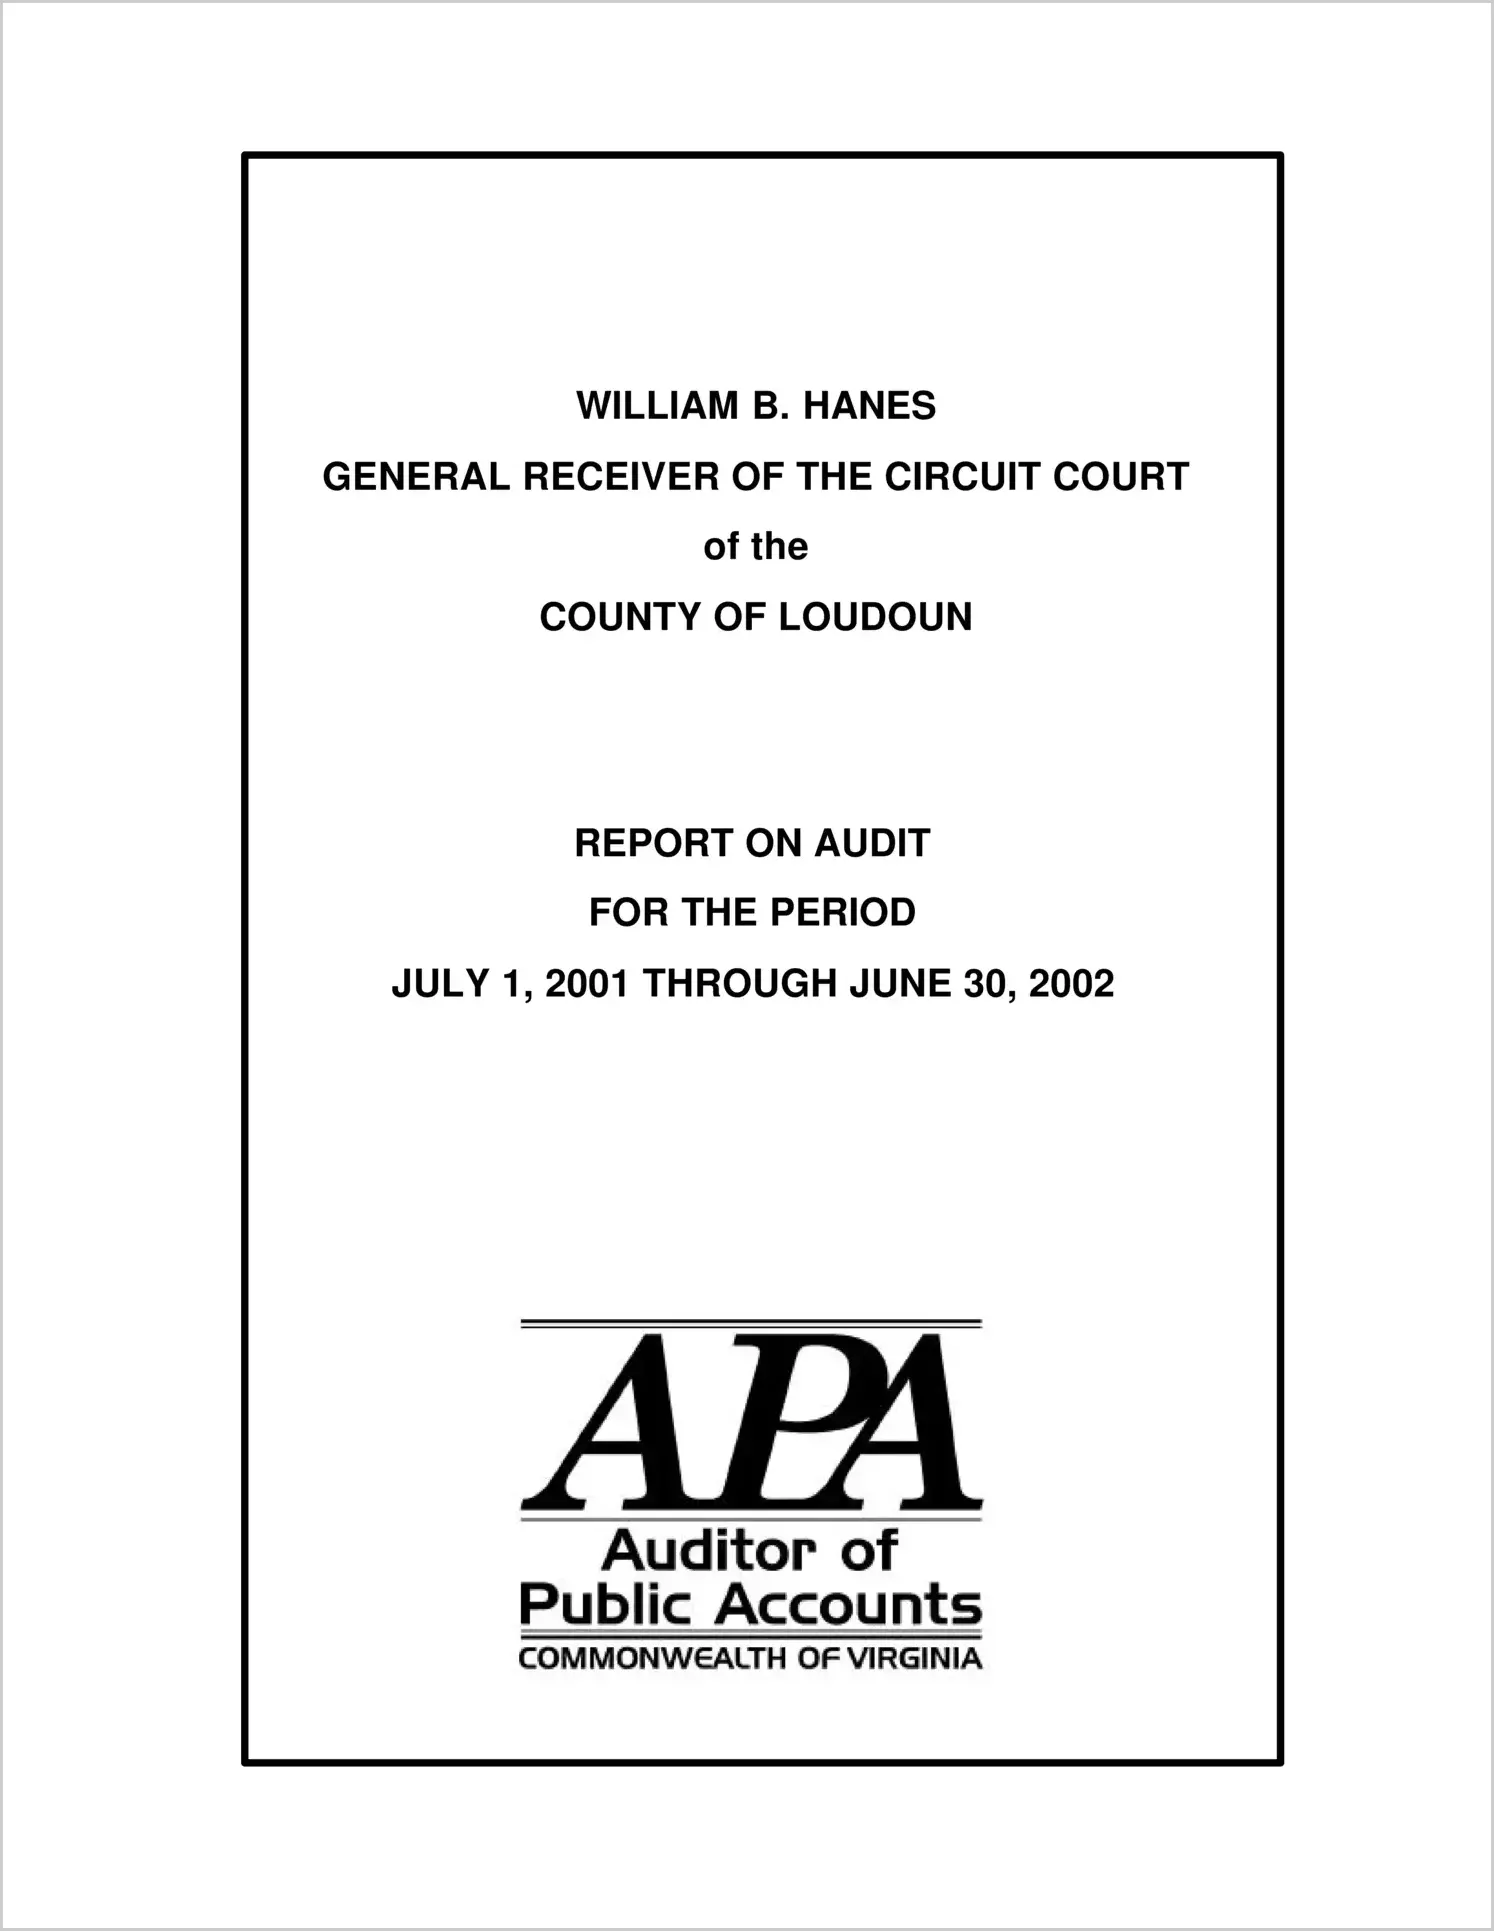 General Receiver of the Circuit Court of the County of Loudoun for the year ended June 30, 2002